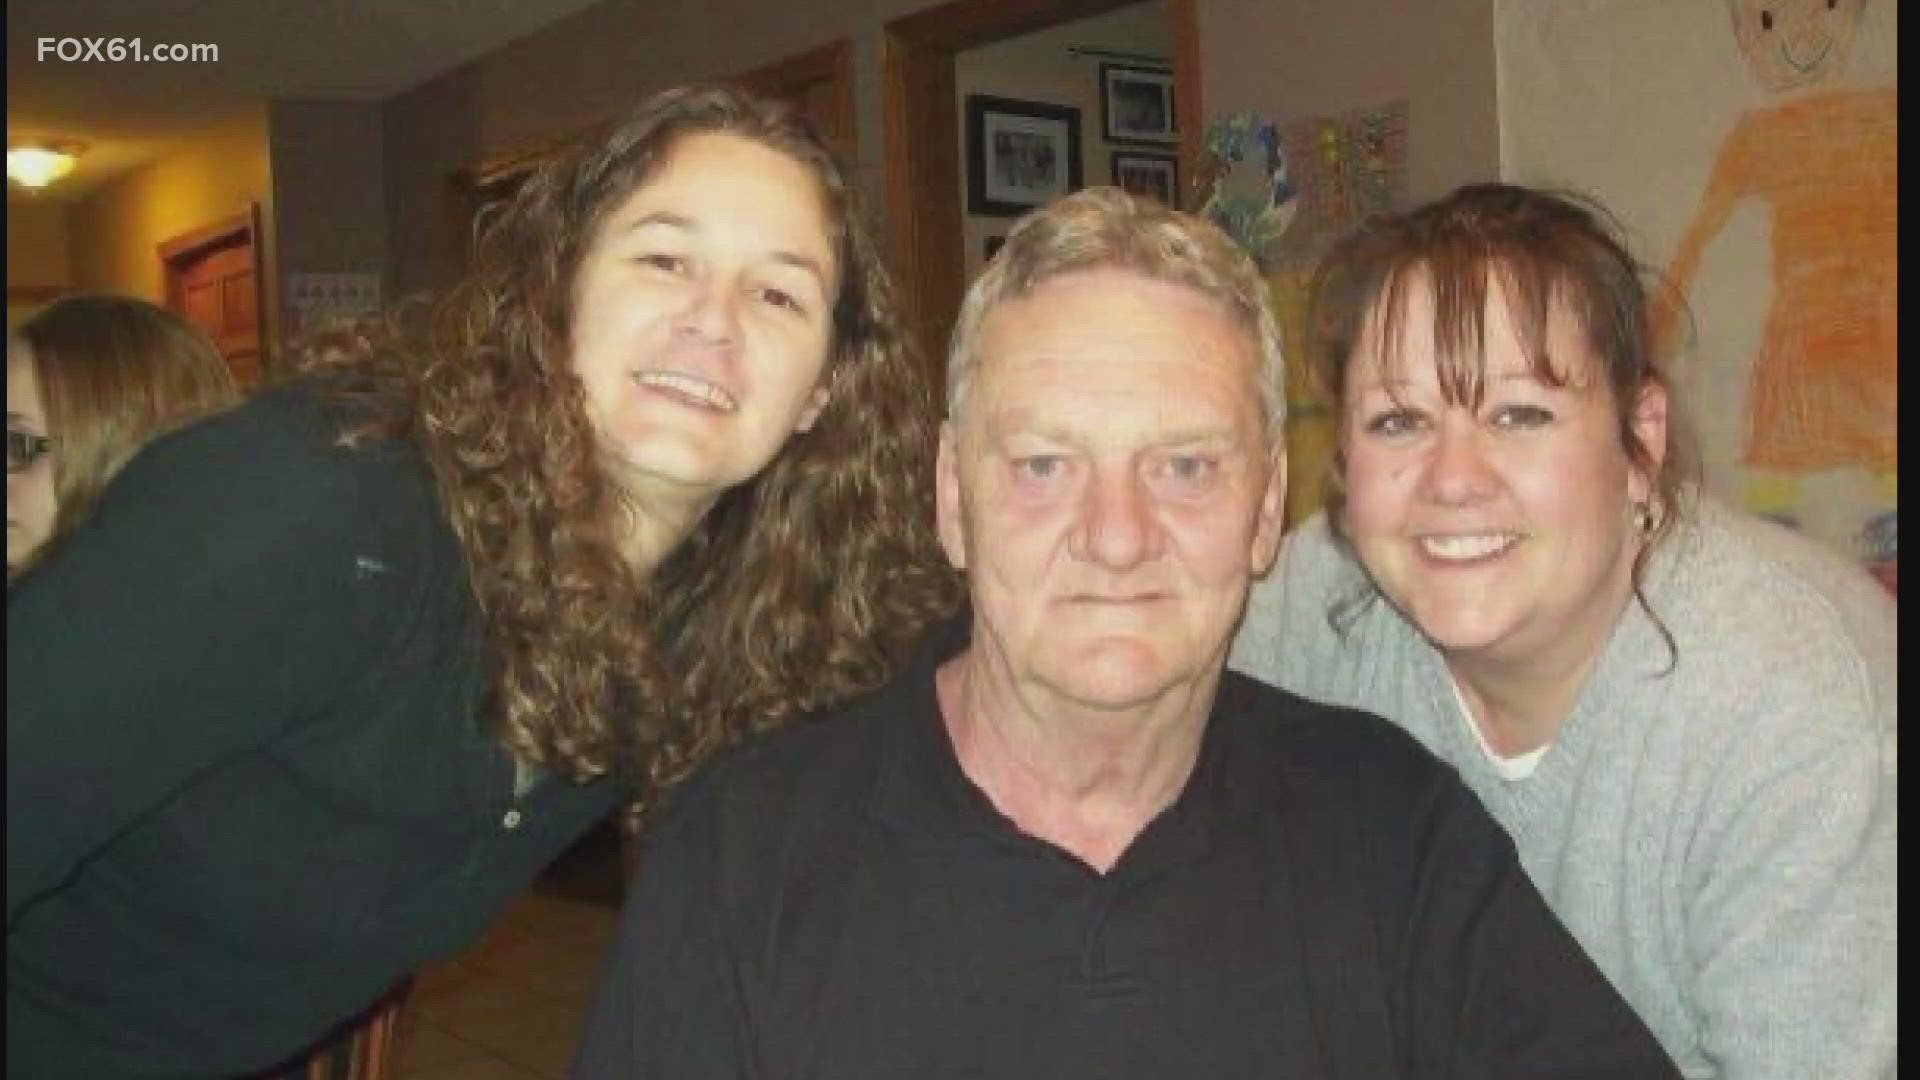 Daniel Farrar went missing in 2014 after he left his assisted living facility in Westbrook. Nearly a decade later, his daughters continue to search for answers.